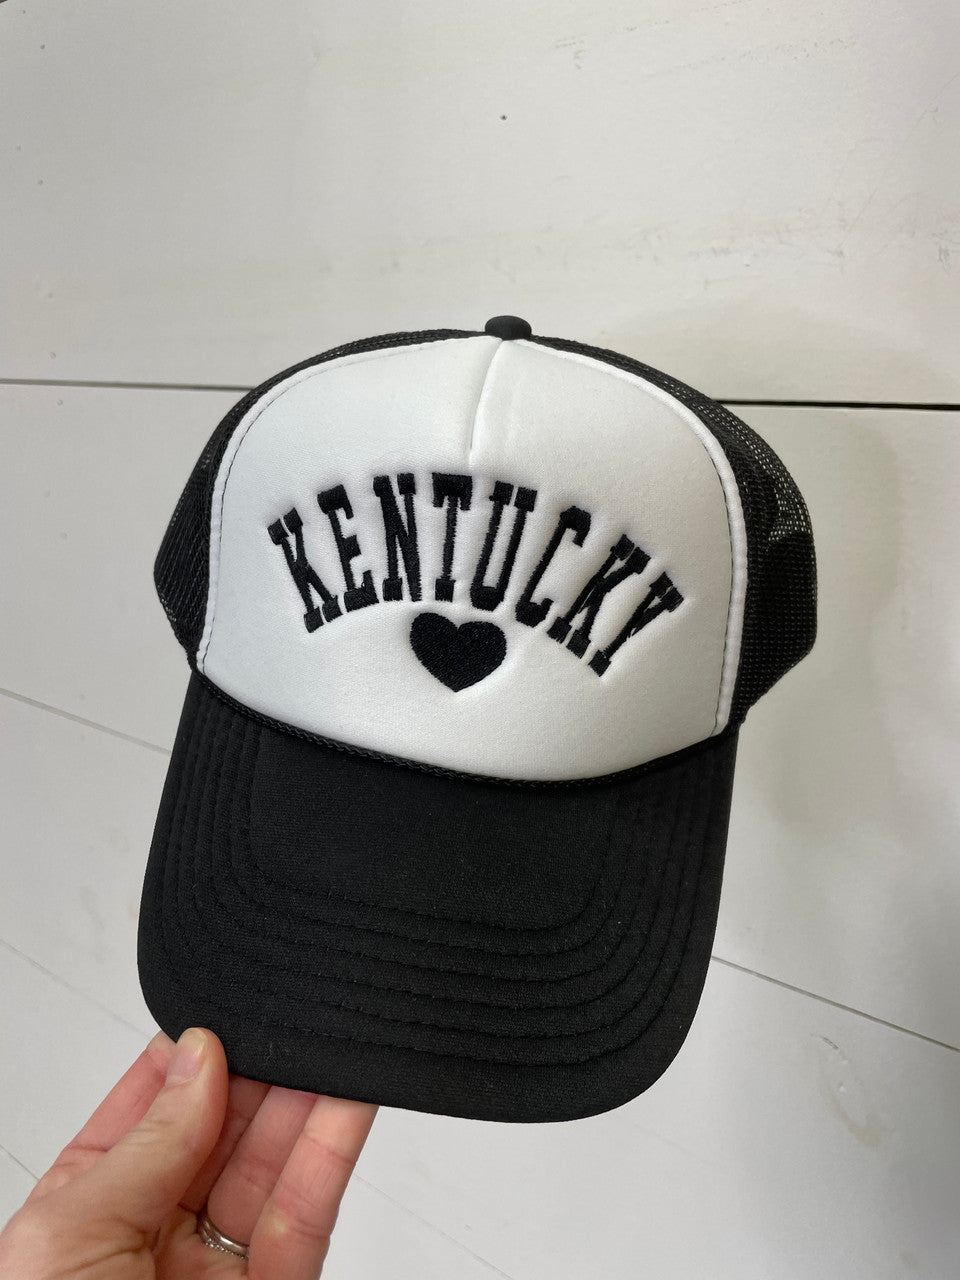 Name Your State Black and White Cap